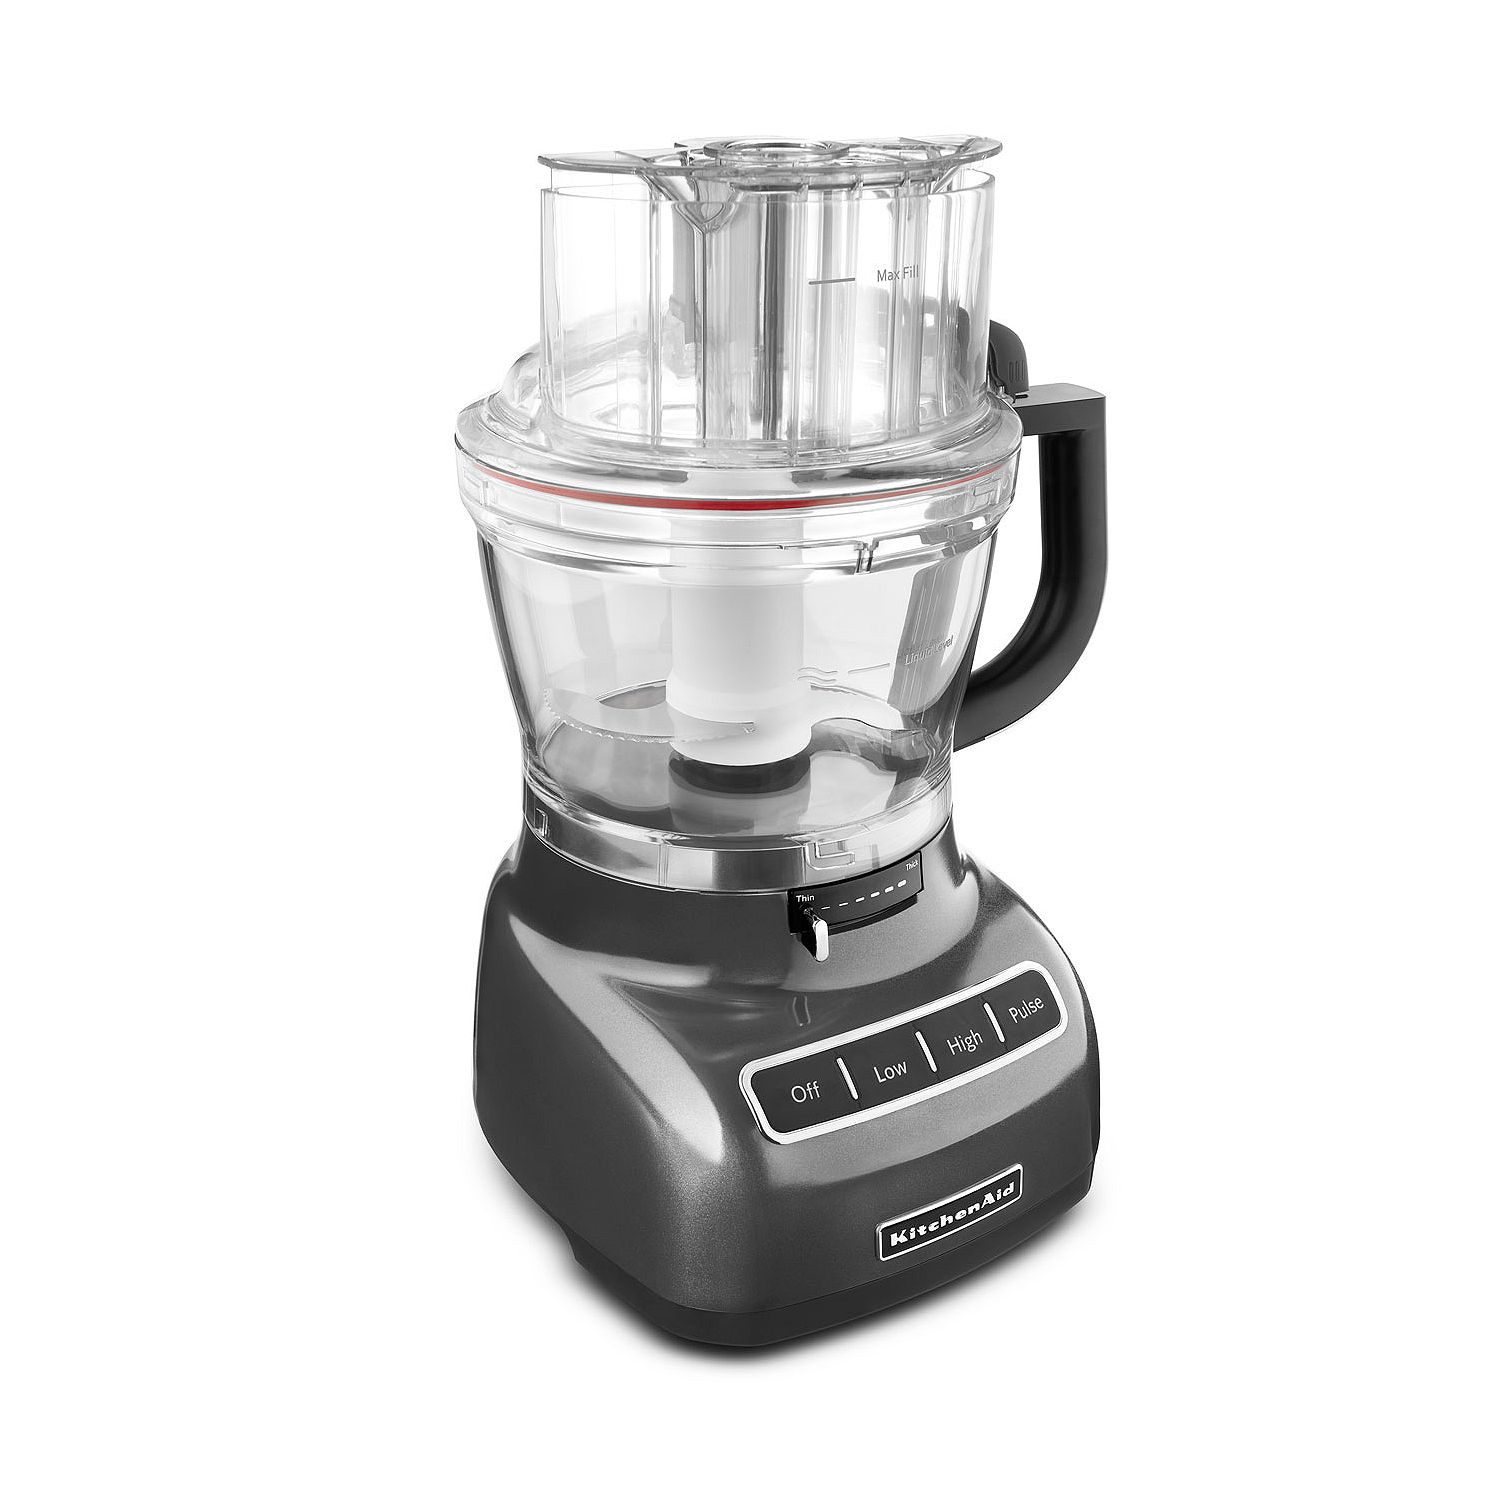 KitchenAid 11-cup food processor with ExactSlice for $100